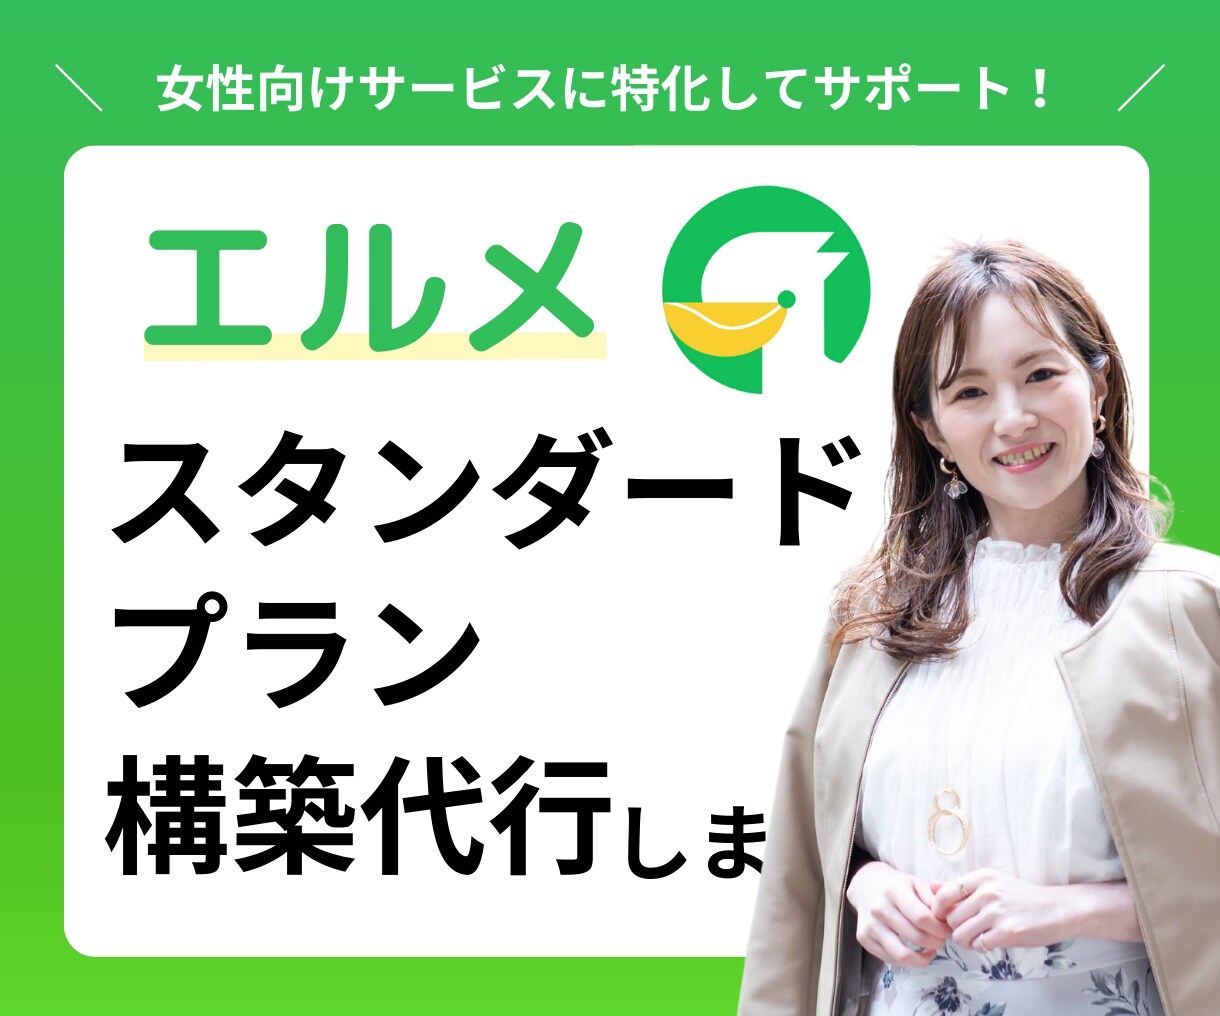 💬 Coconala ｜ Initial construction of official LINE Herme Tomomi Osuka ｜ WEB business agency 5.0 …